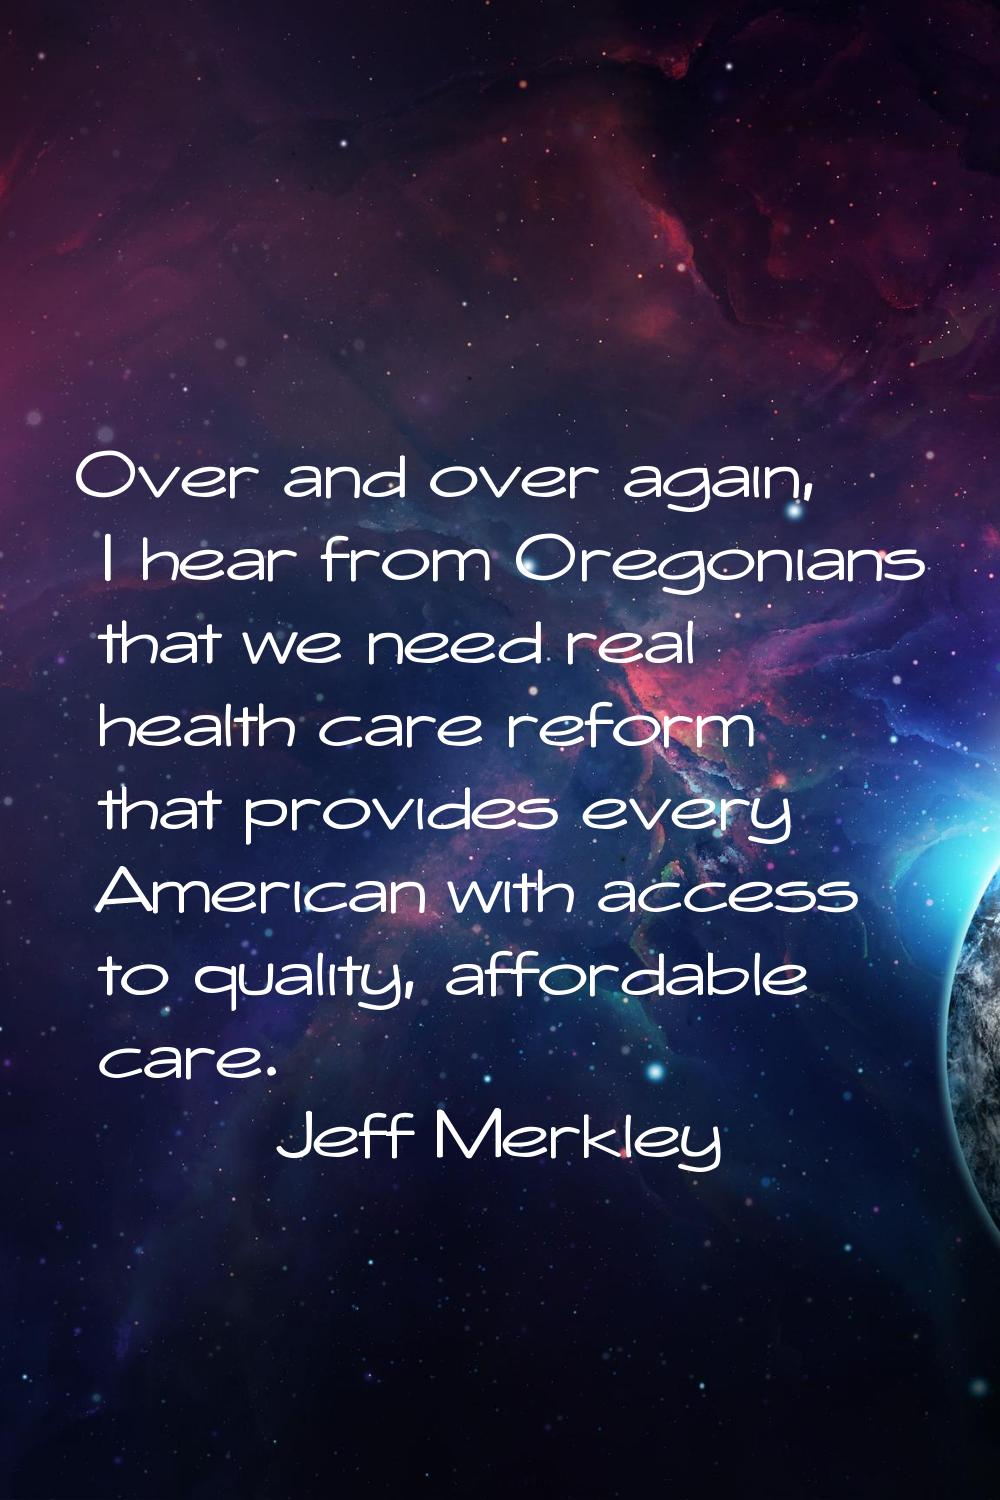 Over and over again, I hear from Oregonians that we need real health care reform that provides ever